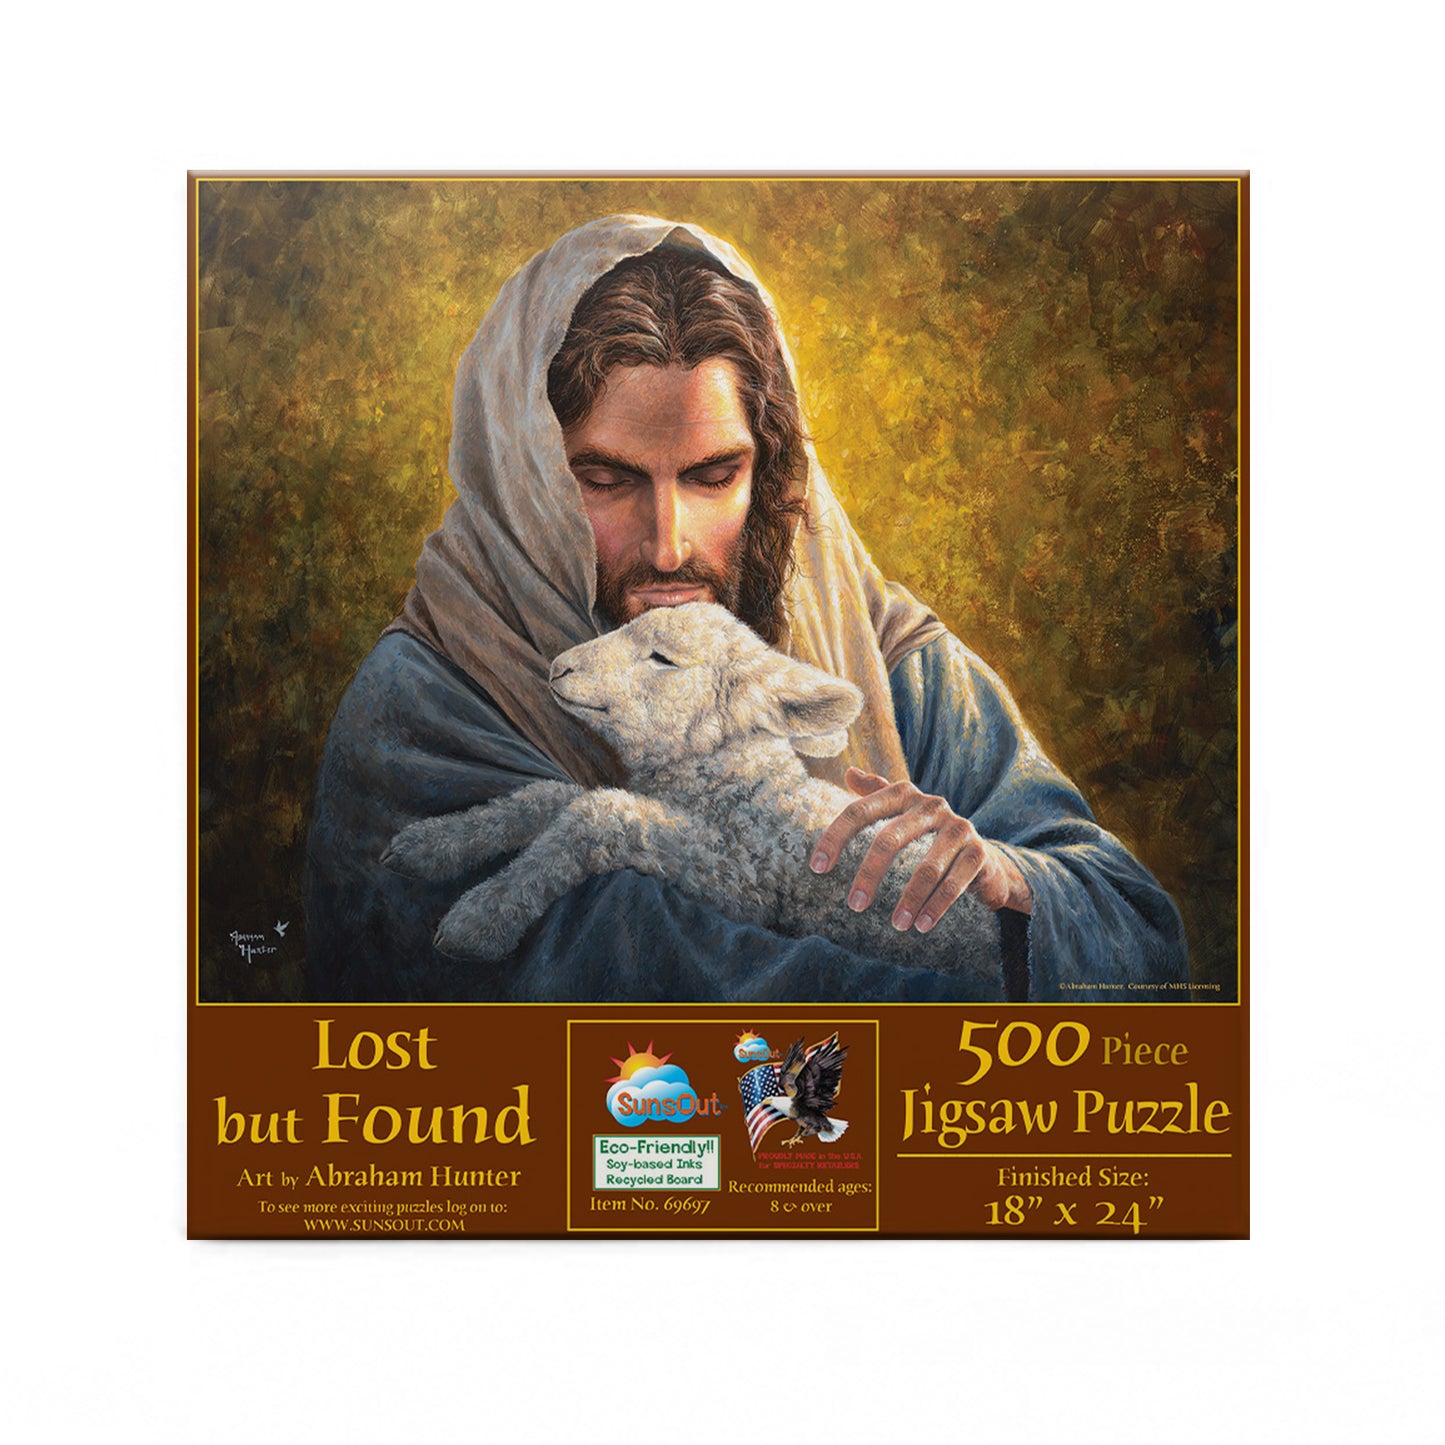 Lost but Found - 500 Piece Jigsaw Puzzle